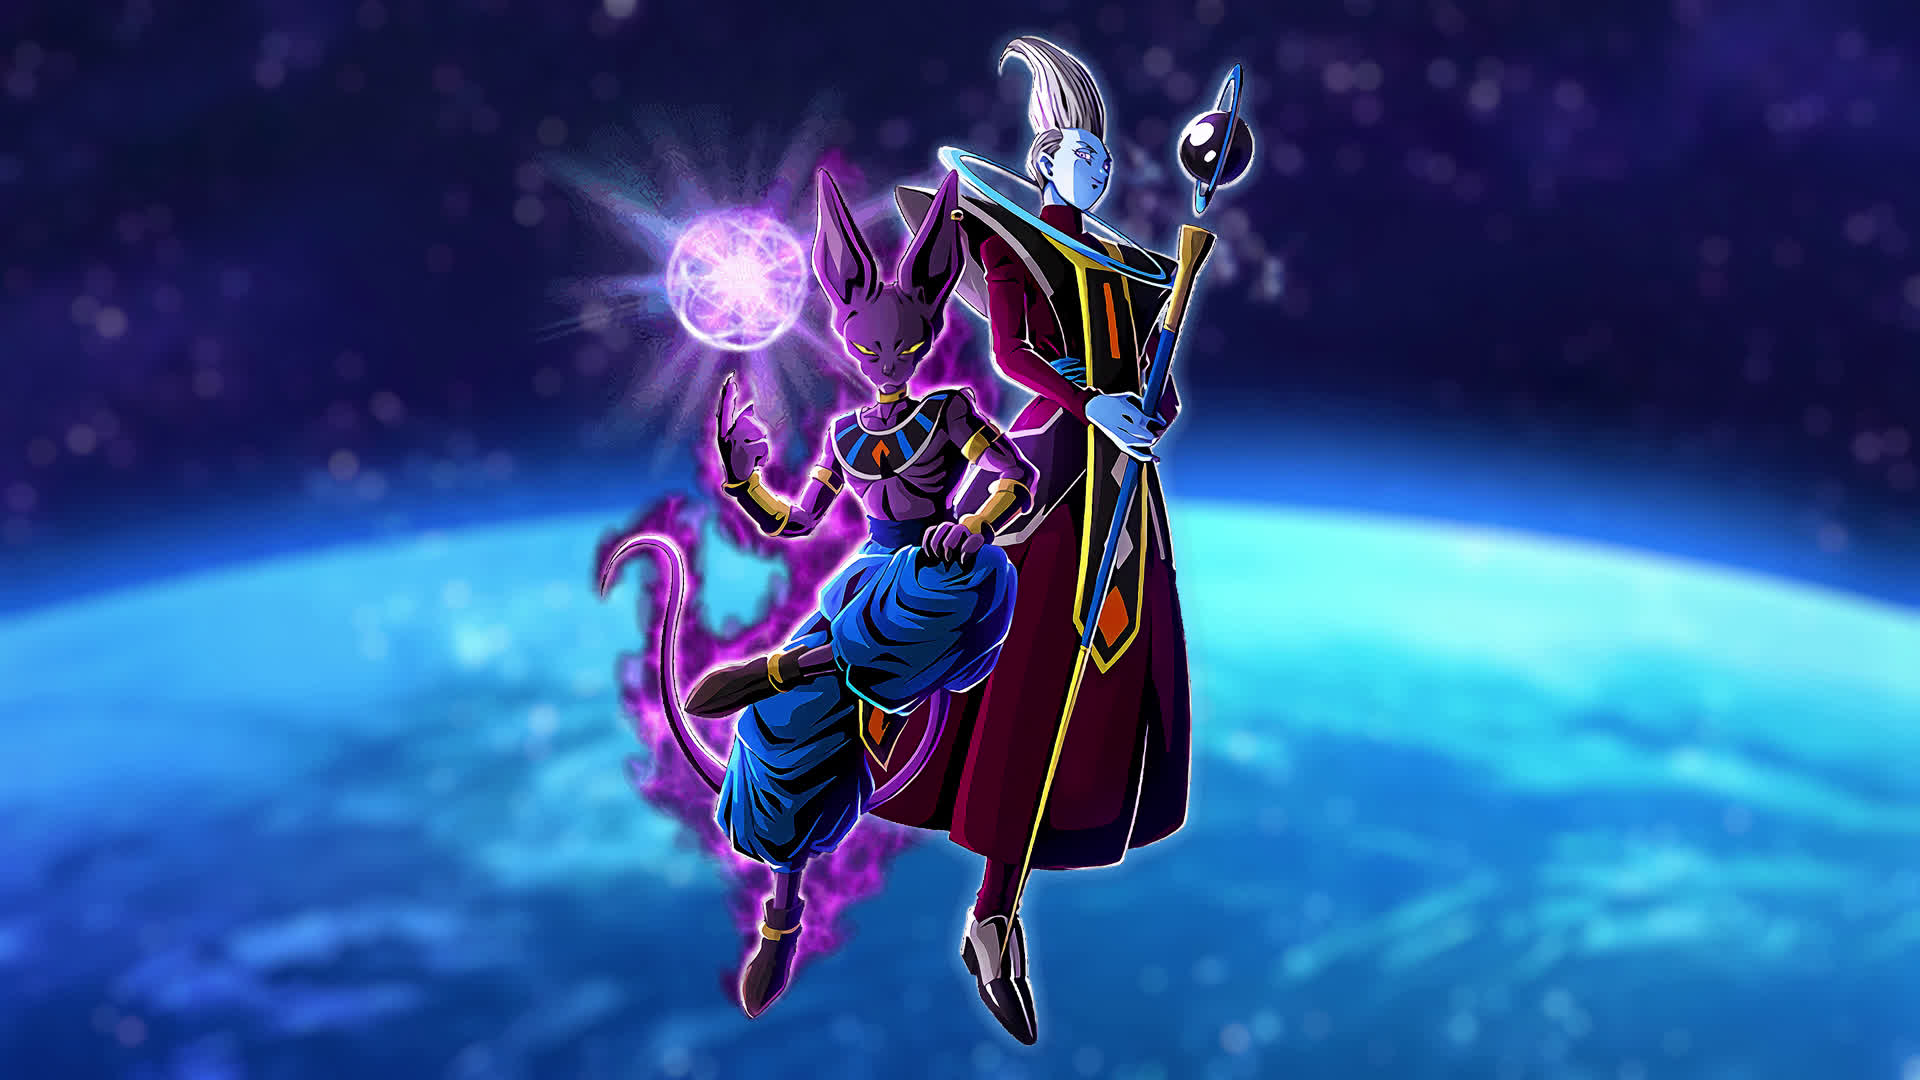 Beerus  Beerus Madness Live Wallpaper  1920x1080  Rare Gallery HD Live  Wallpapers